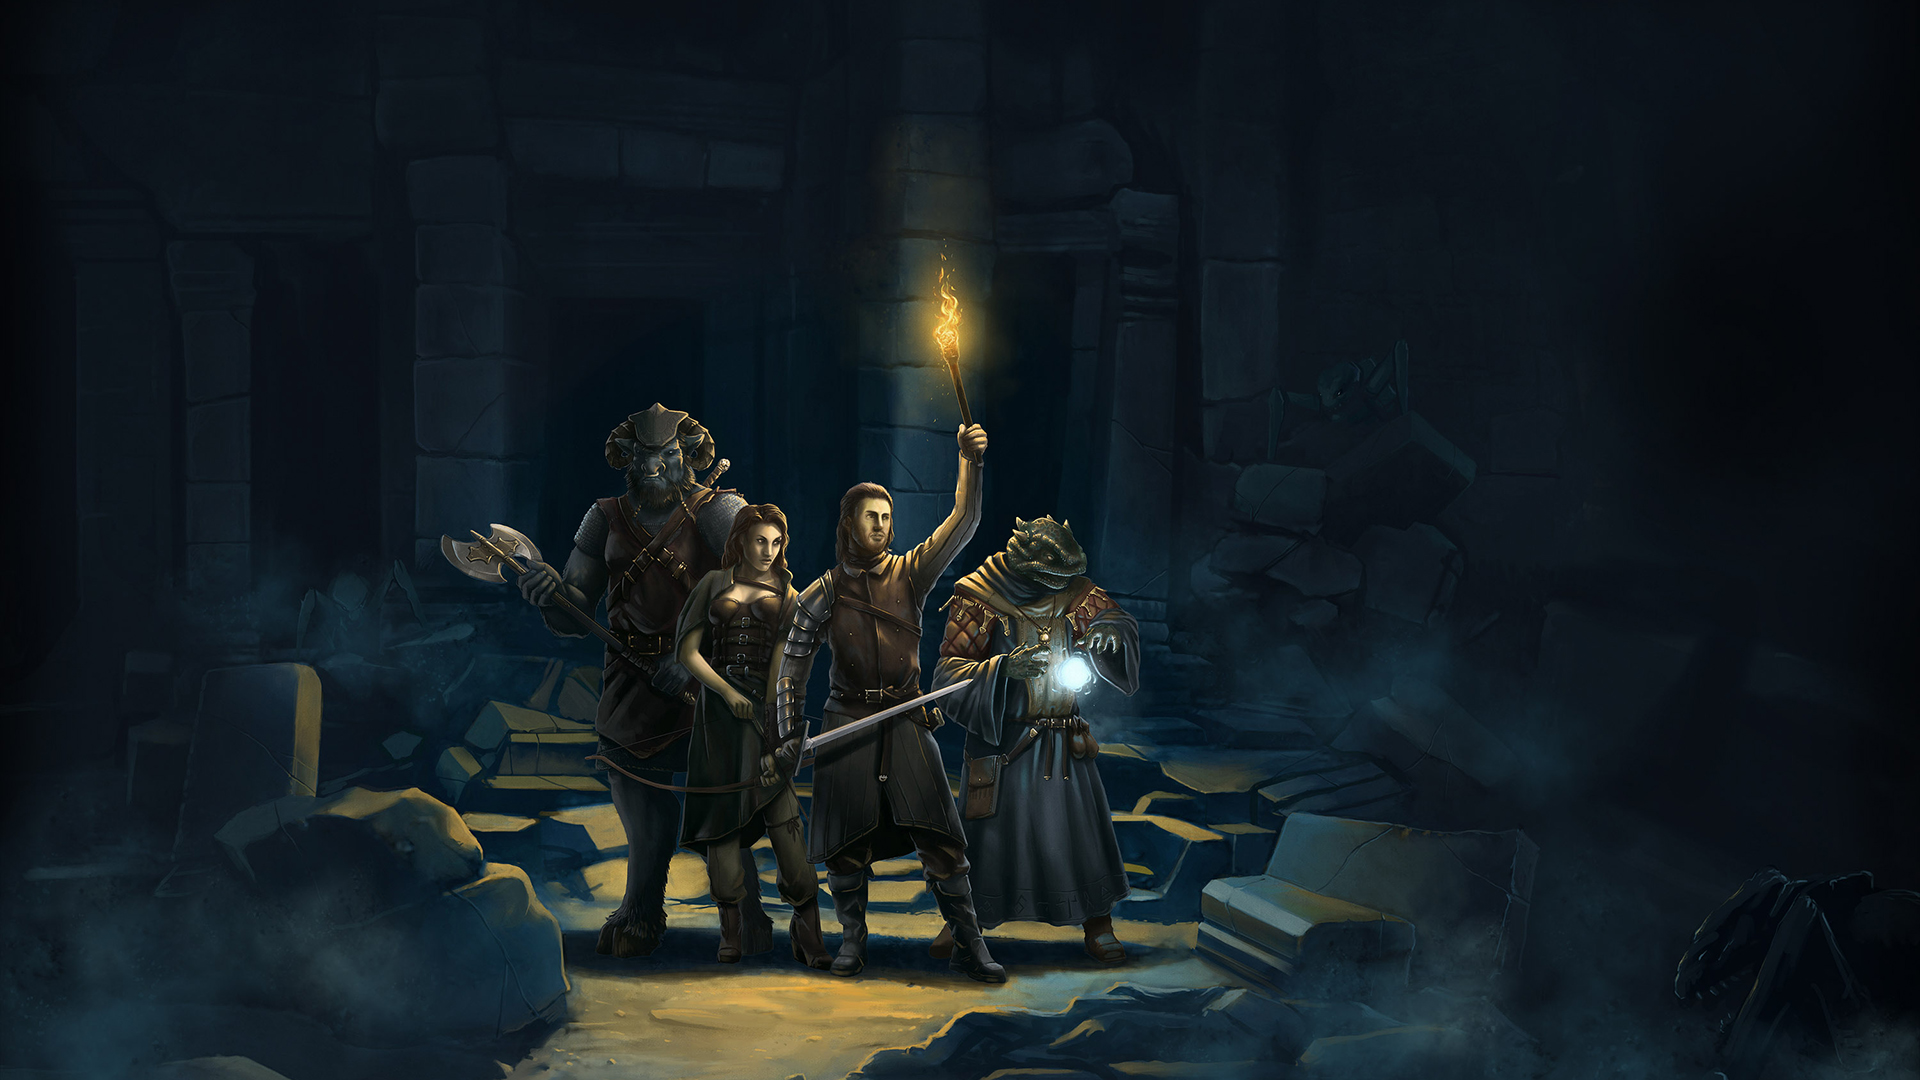 The key art for Legend of Grimrock. In this illustration, two beasts, a man, and a woman stand in a darkened cavern.